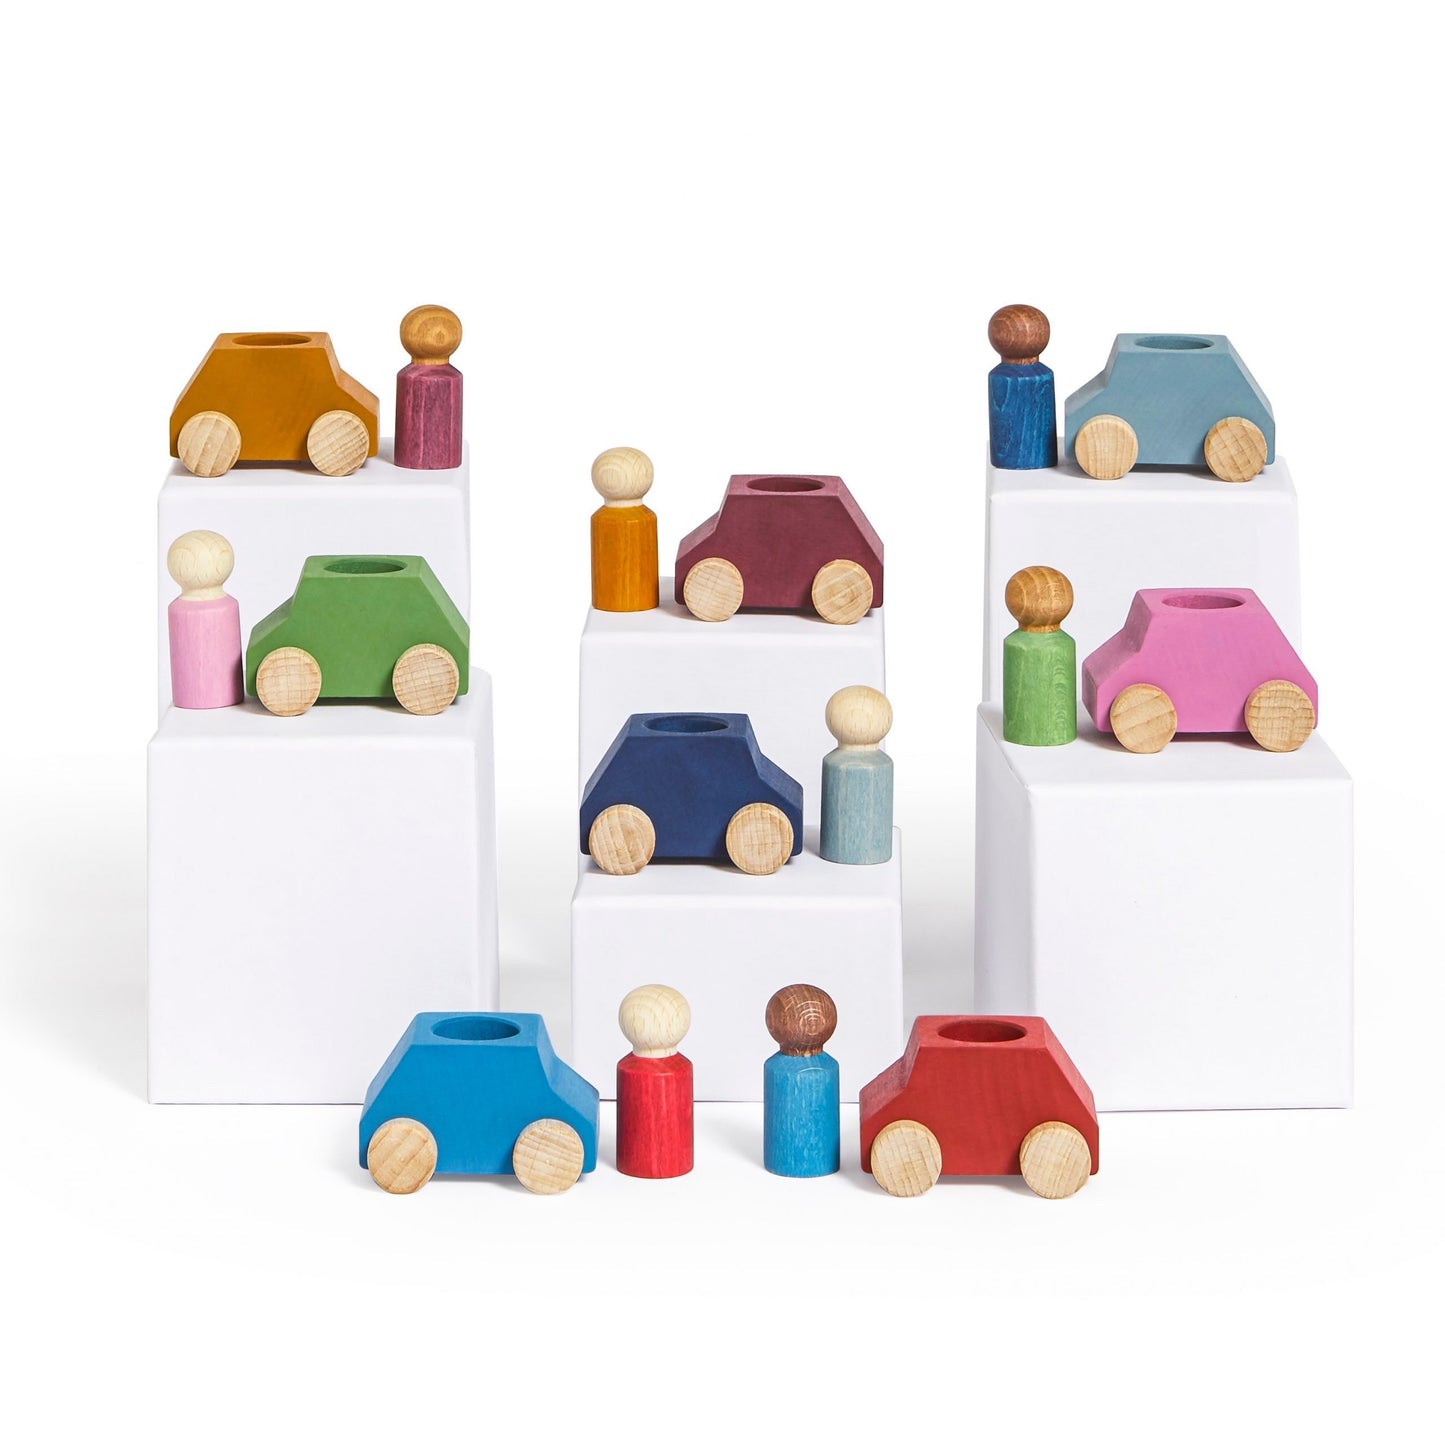 Lubulona Pack of 8 Cars with 8 Figures